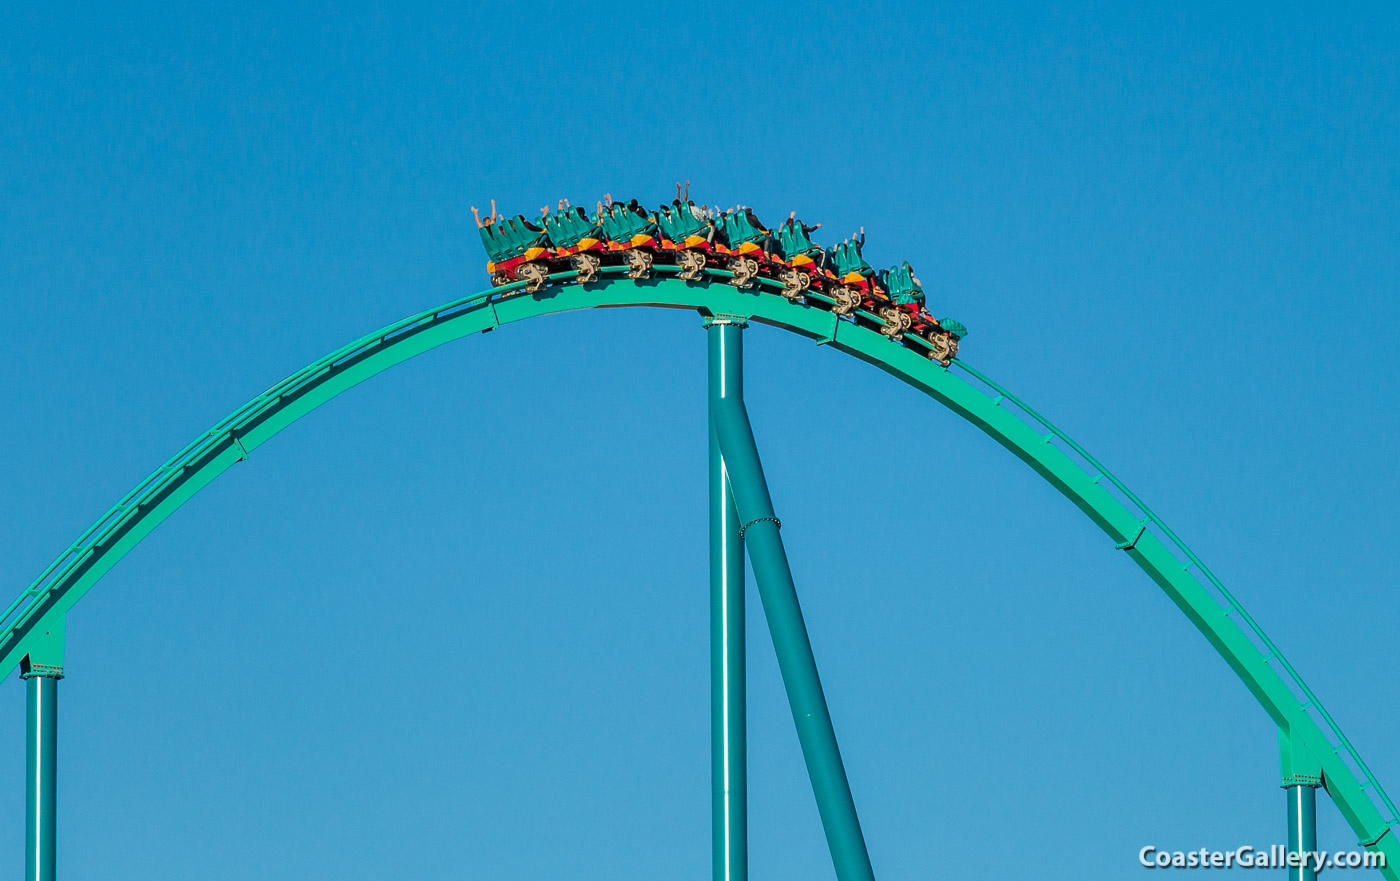 Pictures and details about the Leviathan roller coaster at Canada's Wonderland